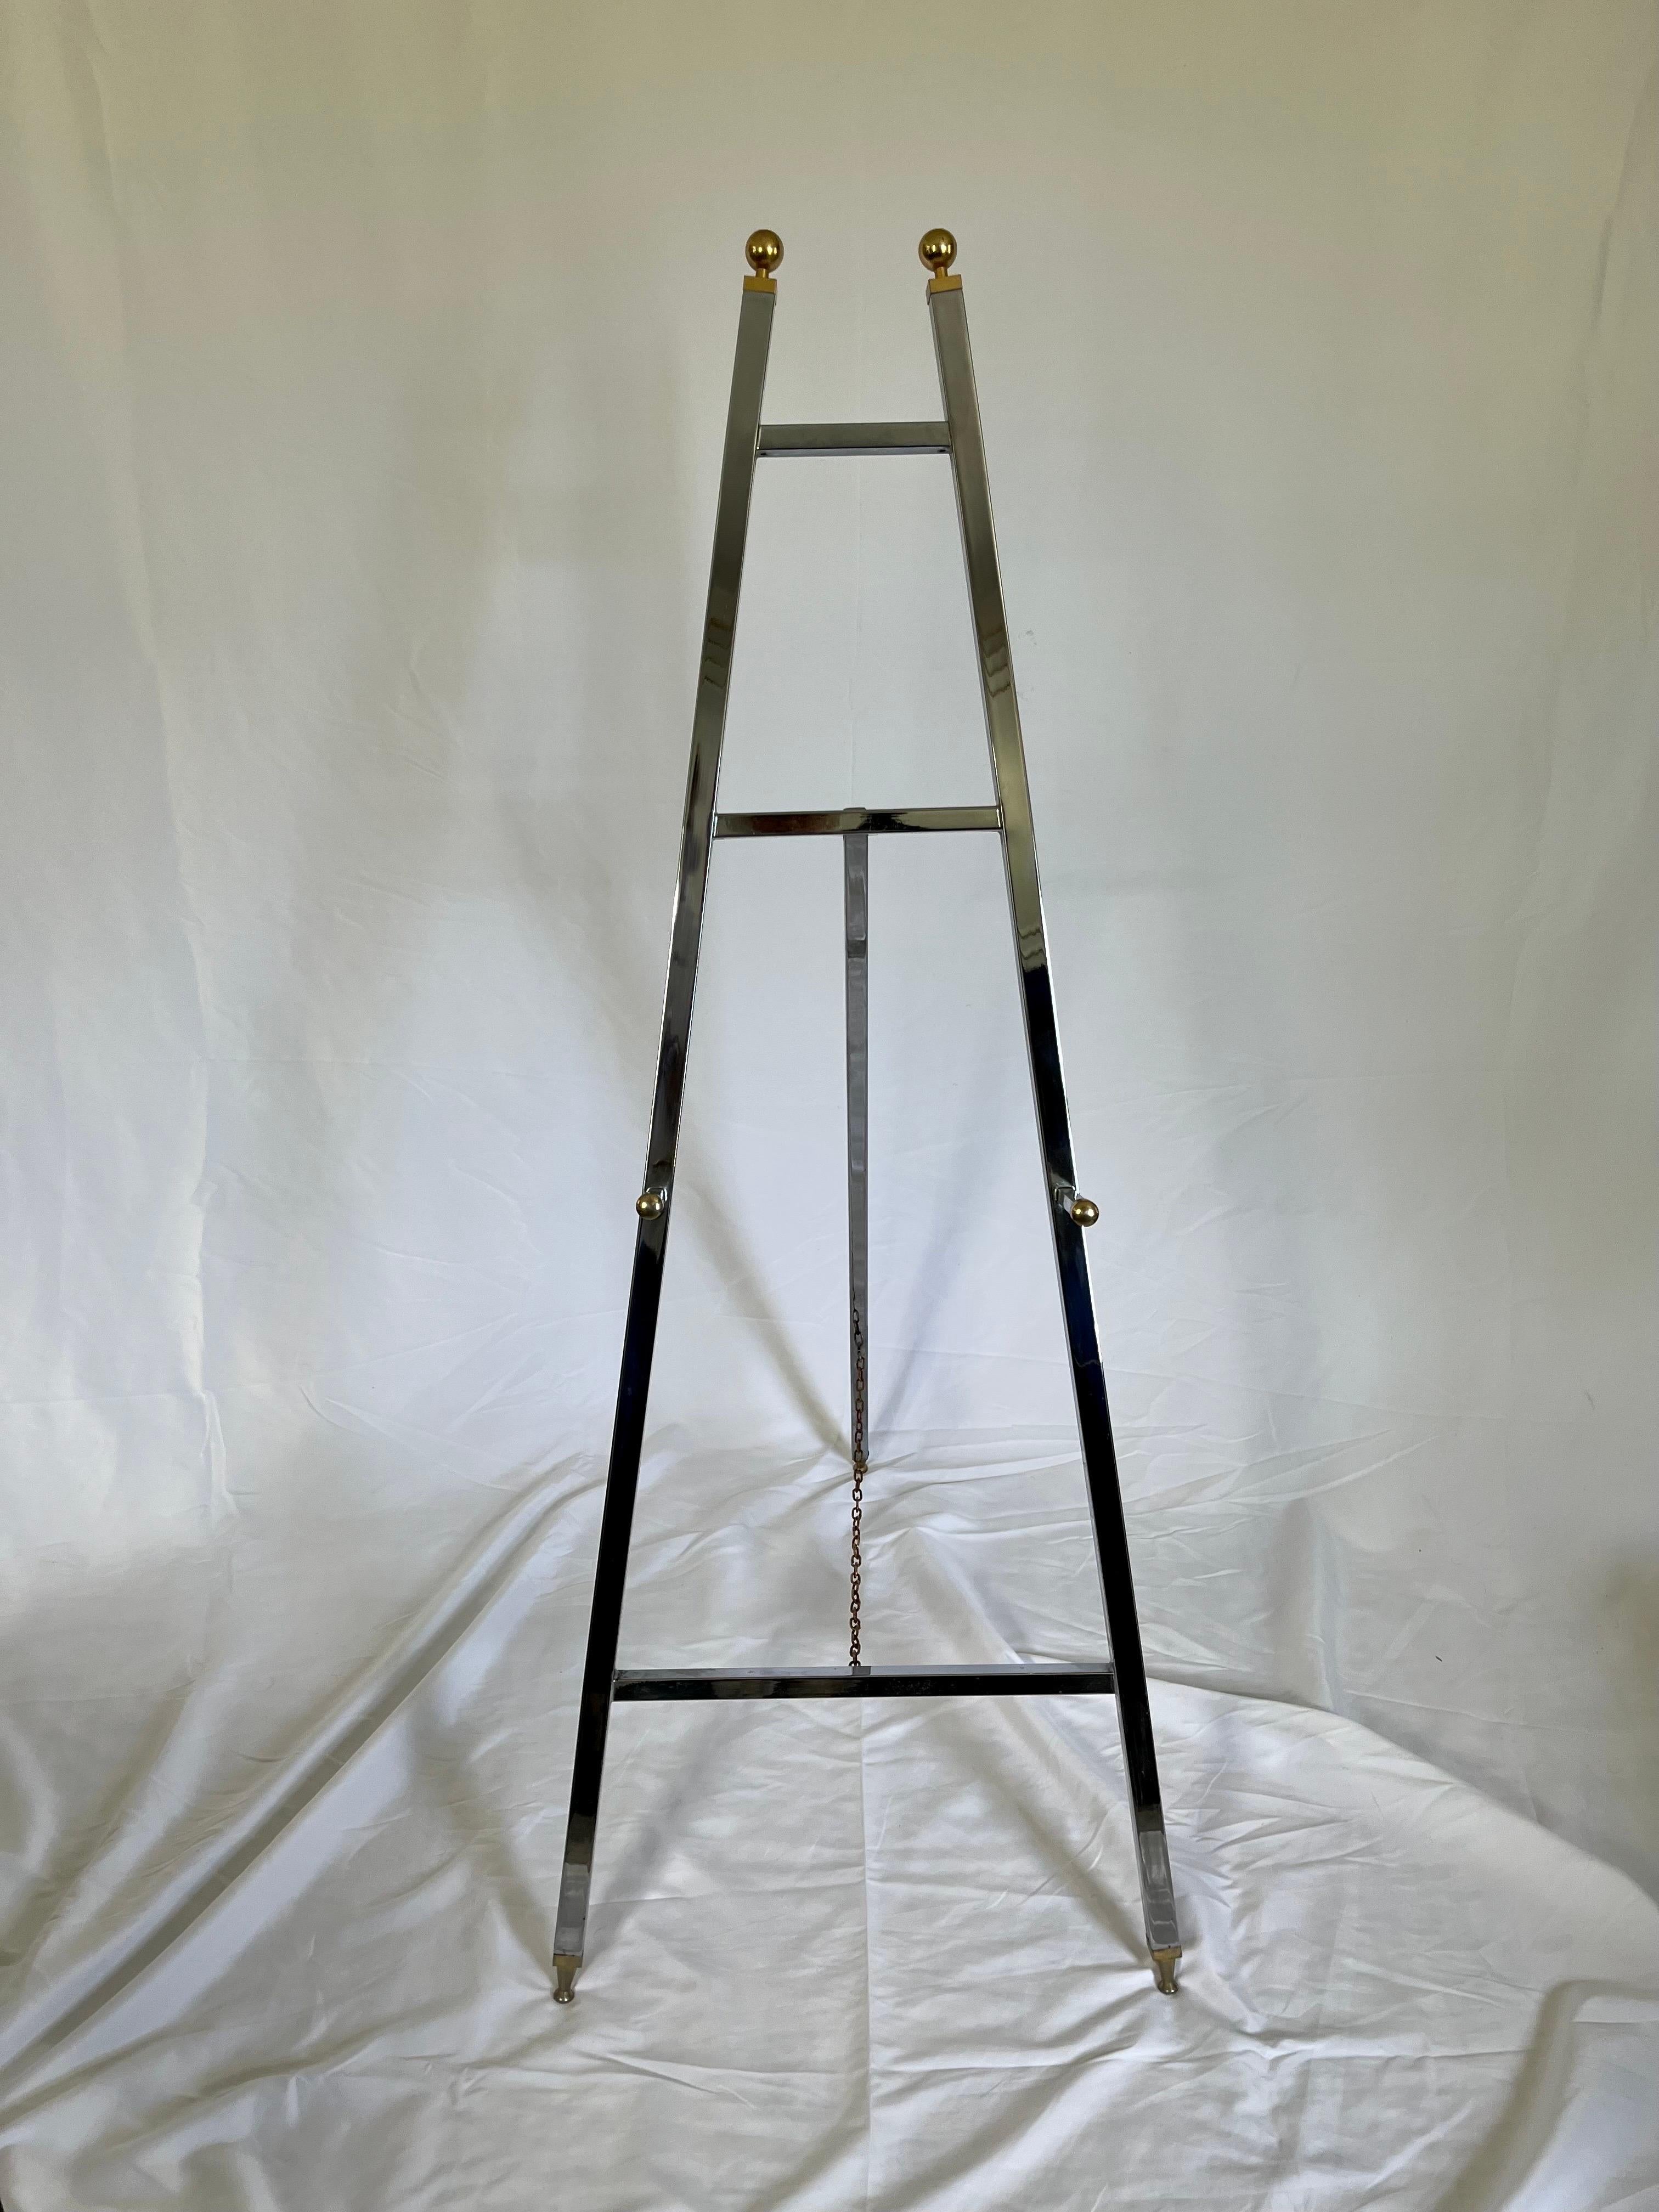 Italian 1970s chrome and brass easel, with chrome chain. Measures 2